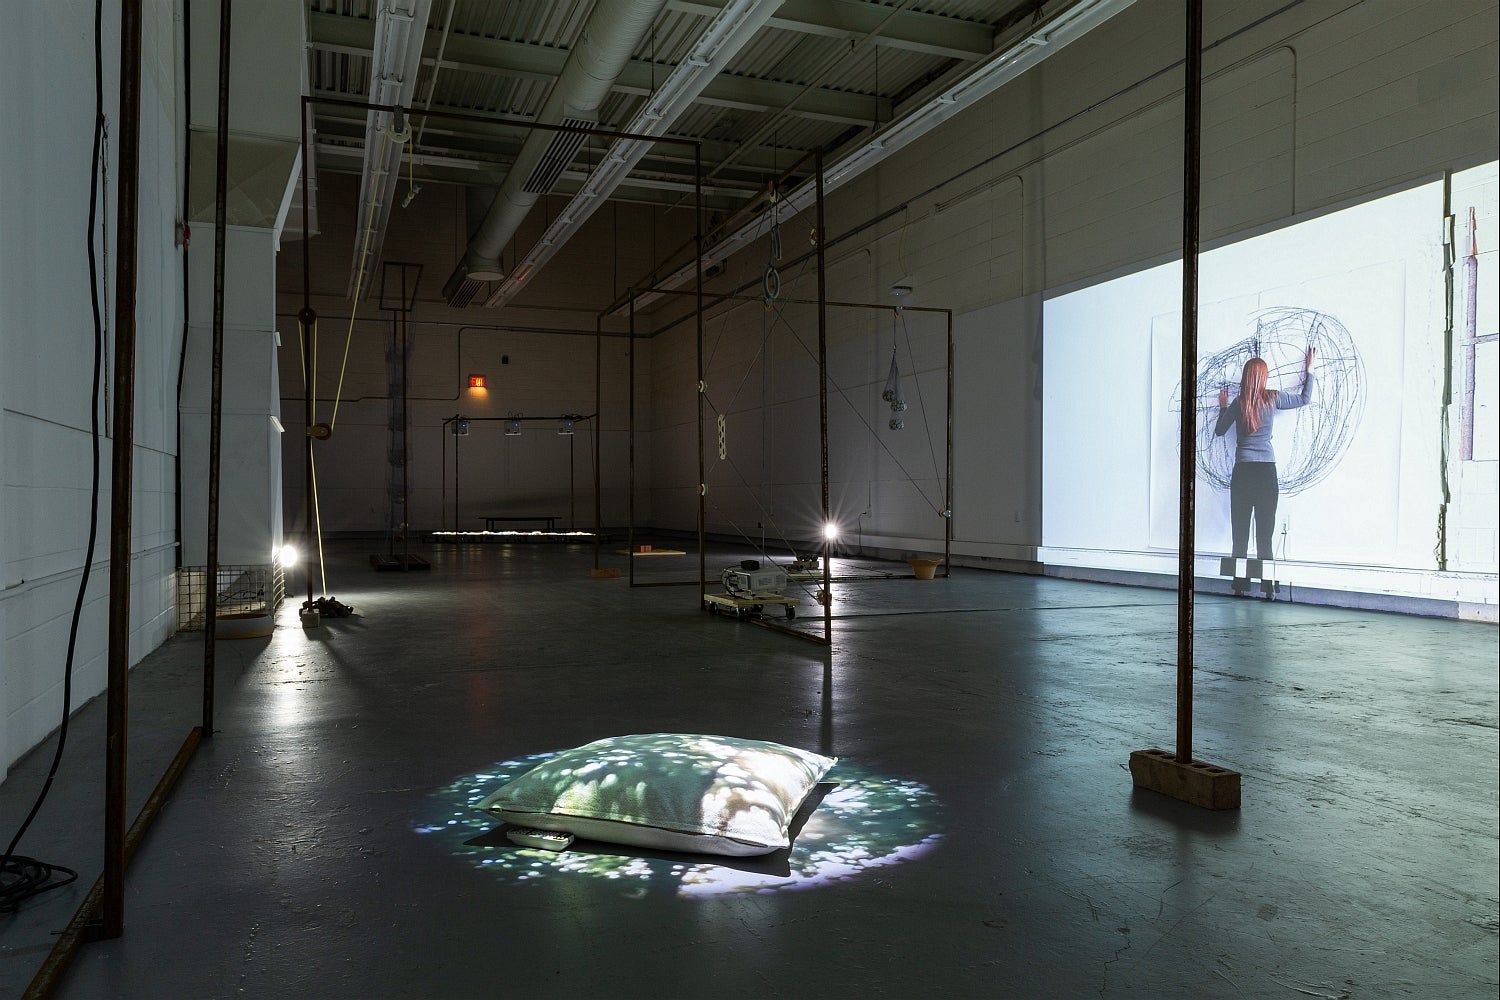 Dark, industrial space with art installation. Projectors light objects on the concrete floor and a video of a person drawing.